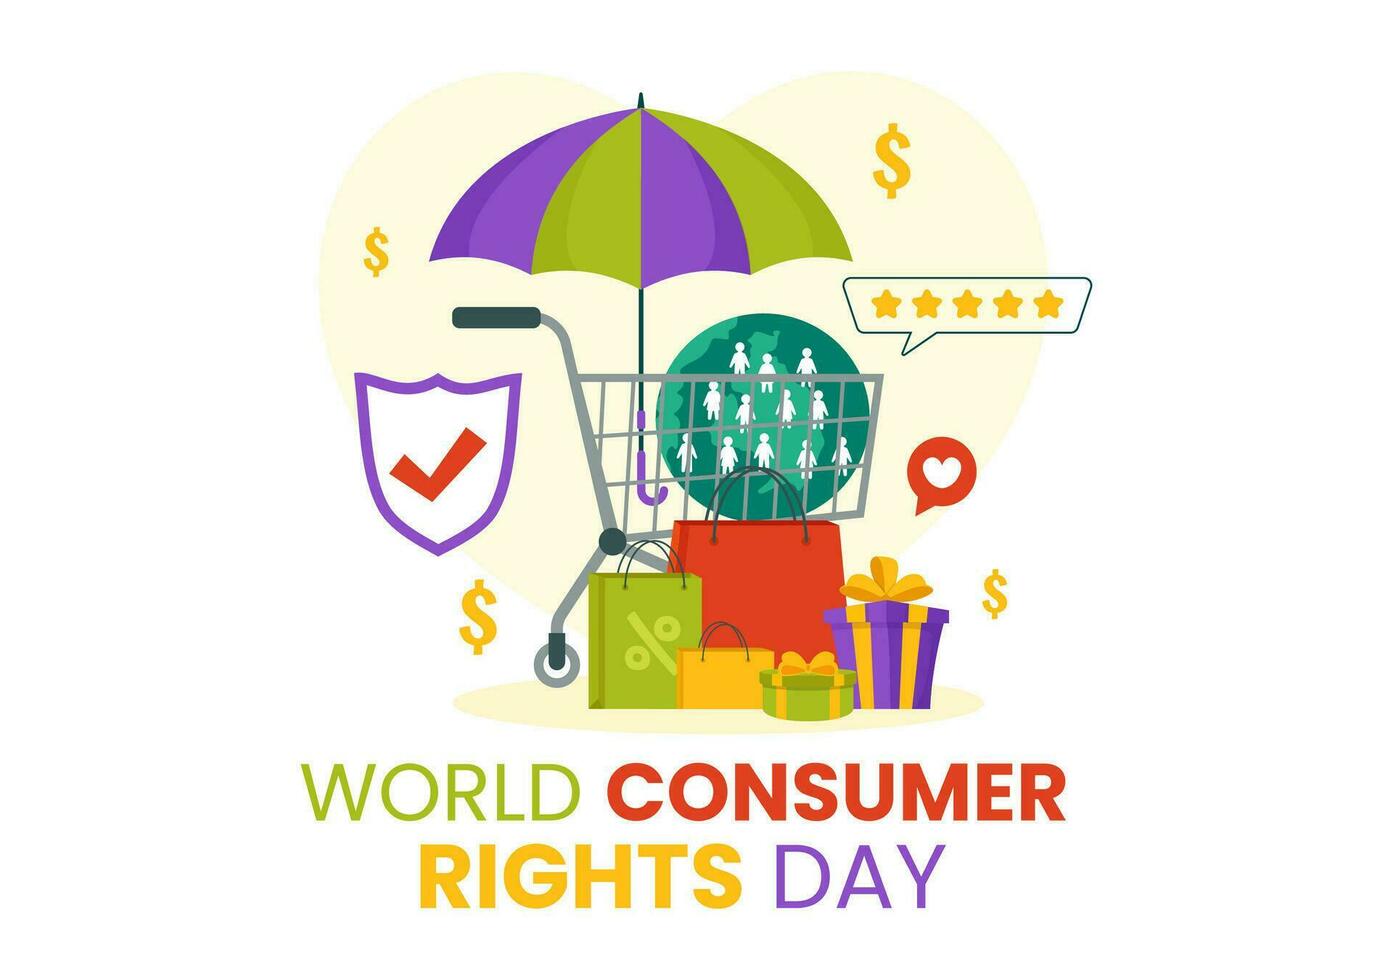 World Consumer Rights Day Vector Illustration on 15 March with Shopping Bags to be Respected and Protected in Flat Cartoon Background